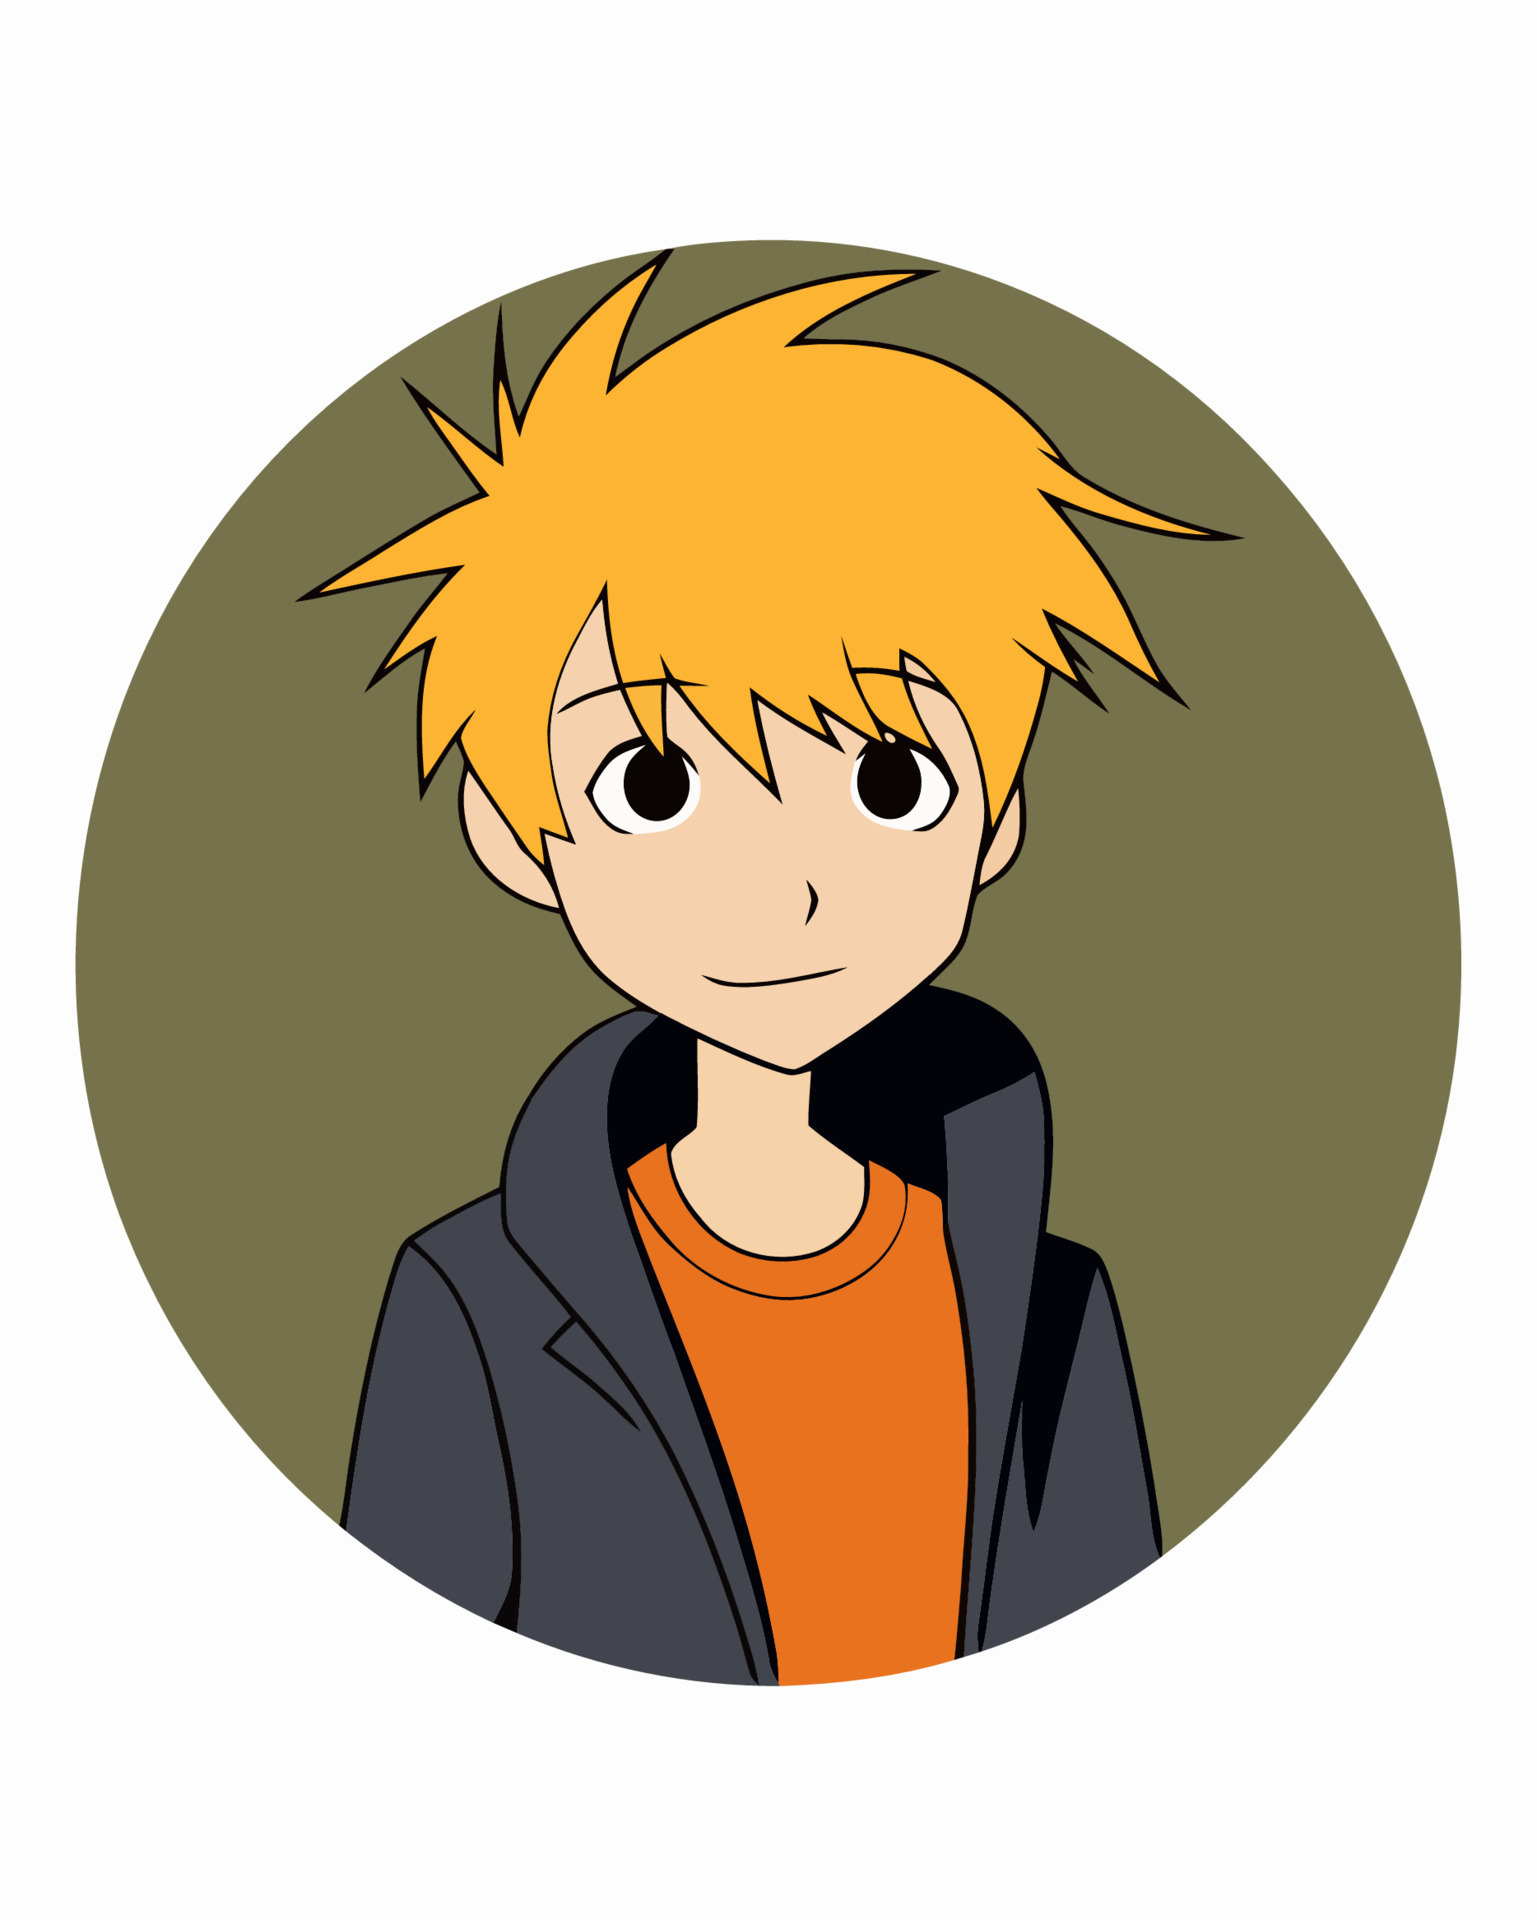 Anime Boy With Shummer Clothes Vector - Anime Logo Icon PNG Image |  Transparent PNG Free Download on SeekPNG